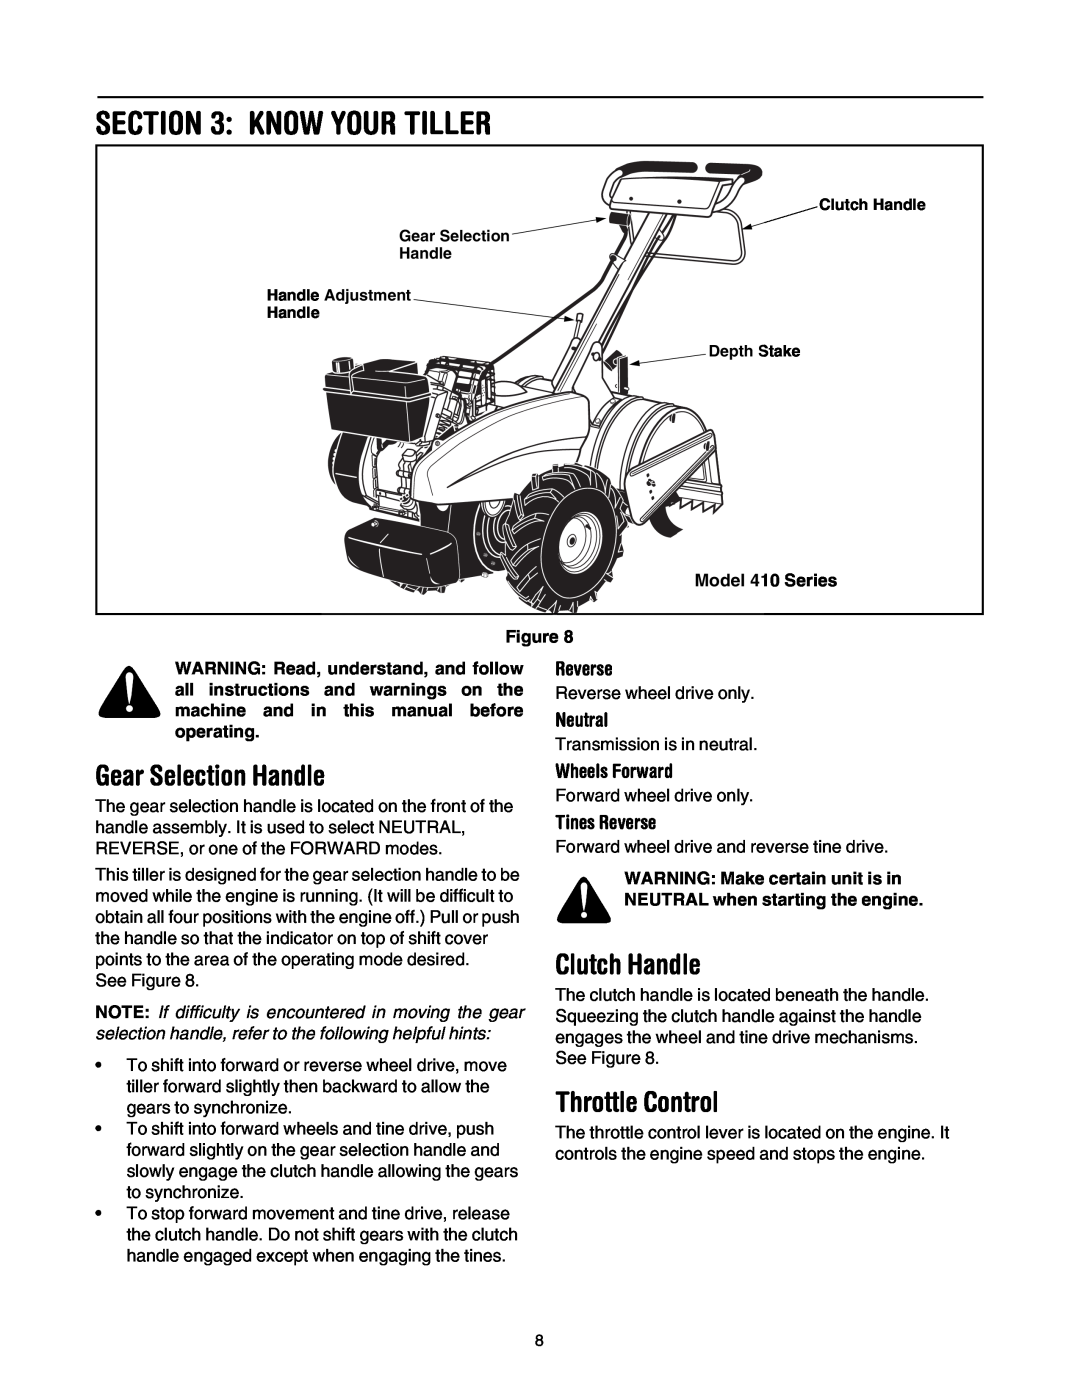 MTD 410 Series Know Your Tiller, Gear Selection Handle, Clutch Handle, Throttle Control, Reverse, Neutral, Wheels Forward 